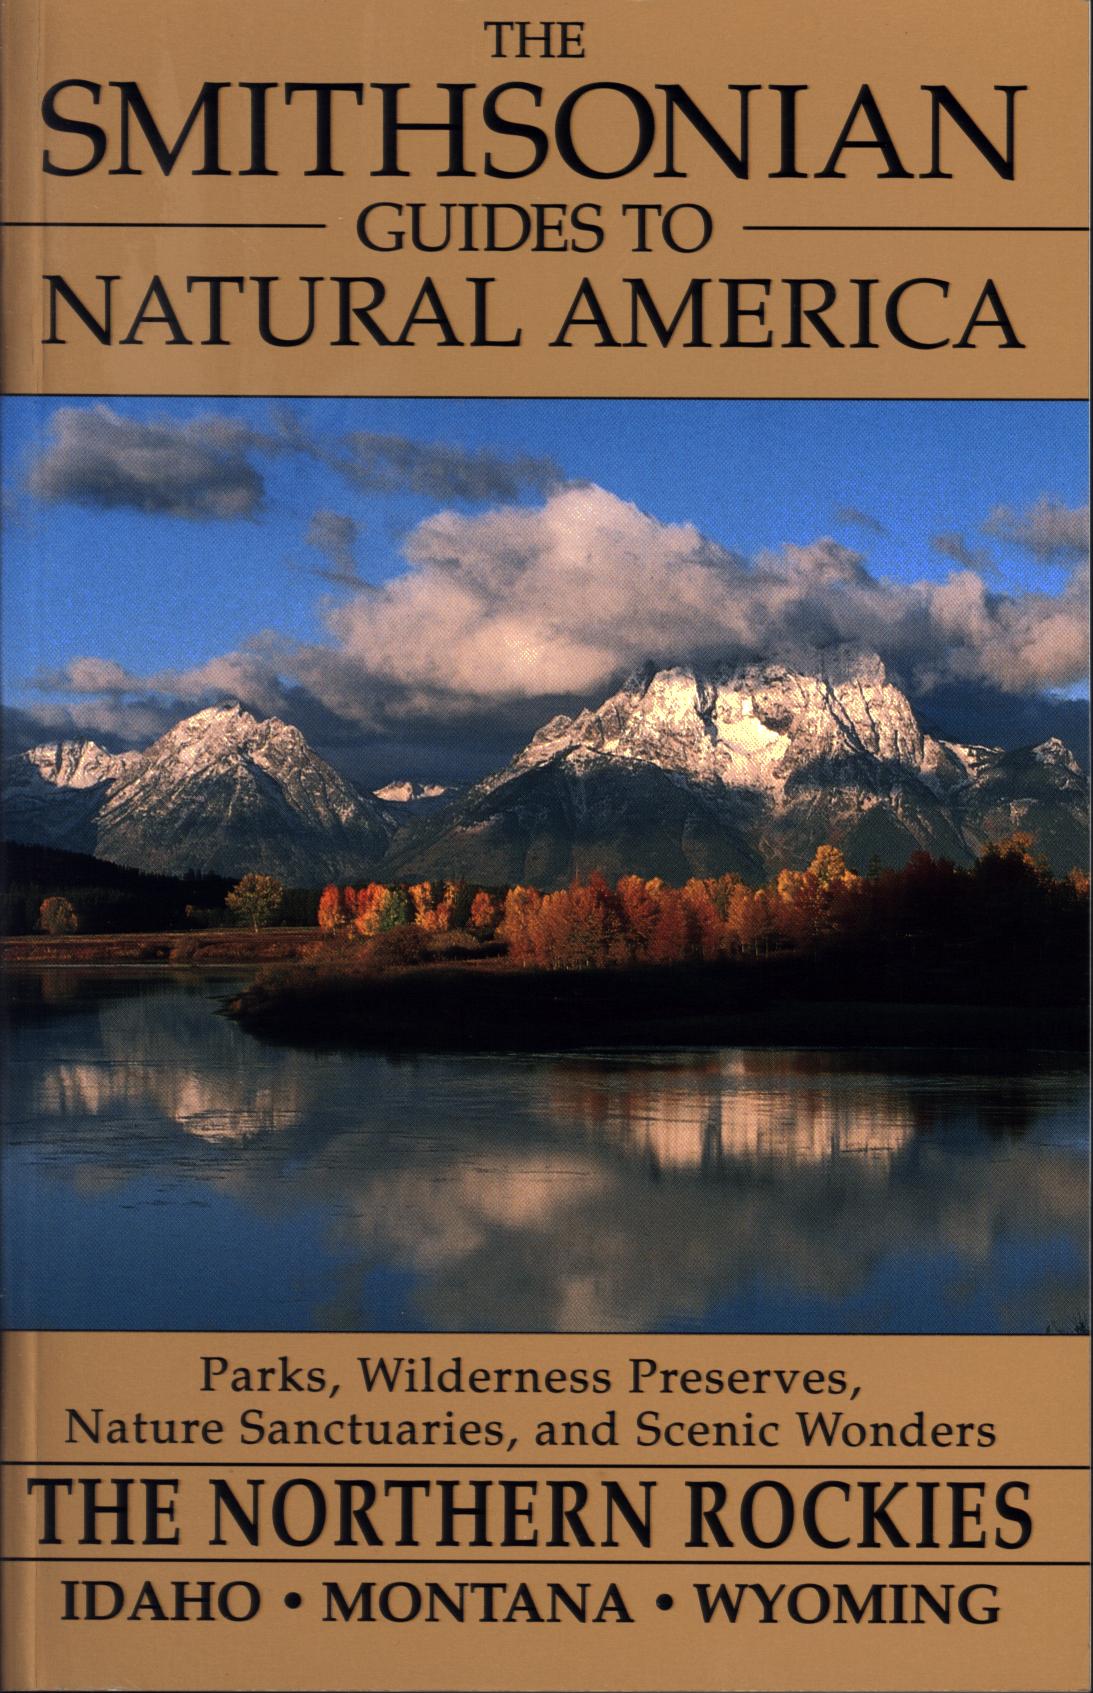 SMITHSONIAN GUIIDES TO NATURAL AMERICA (THE): the Northern Rockies. 